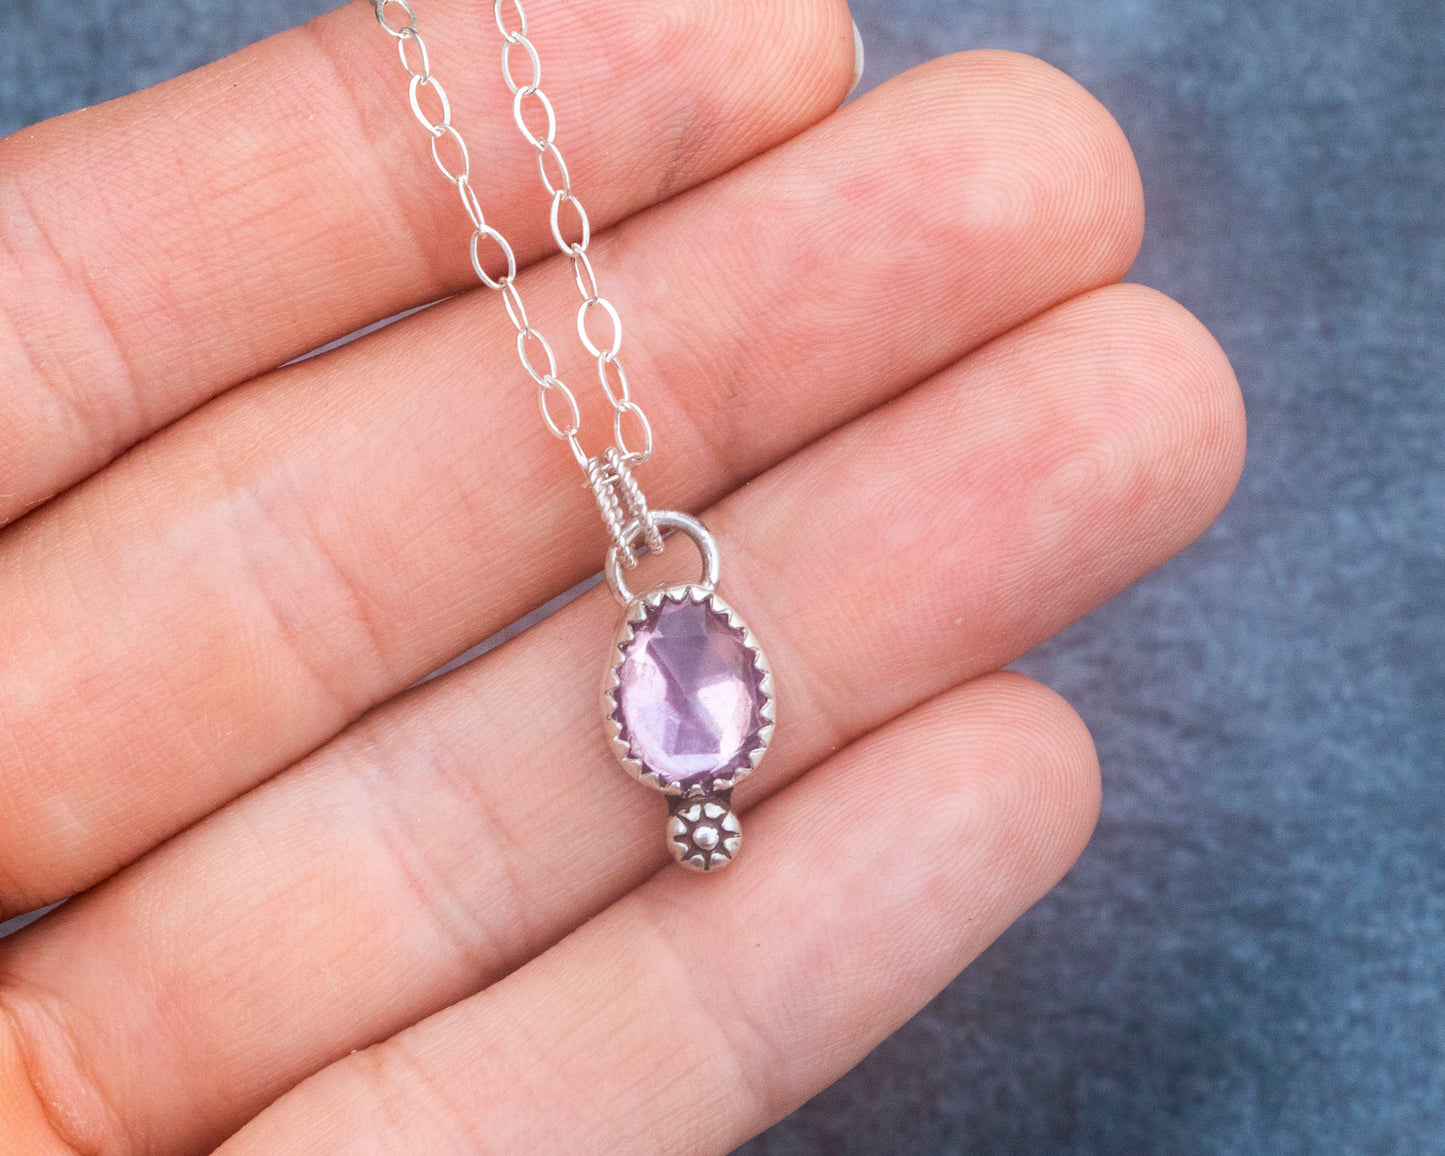 Pink Amethyst with Flower Accent Necklace